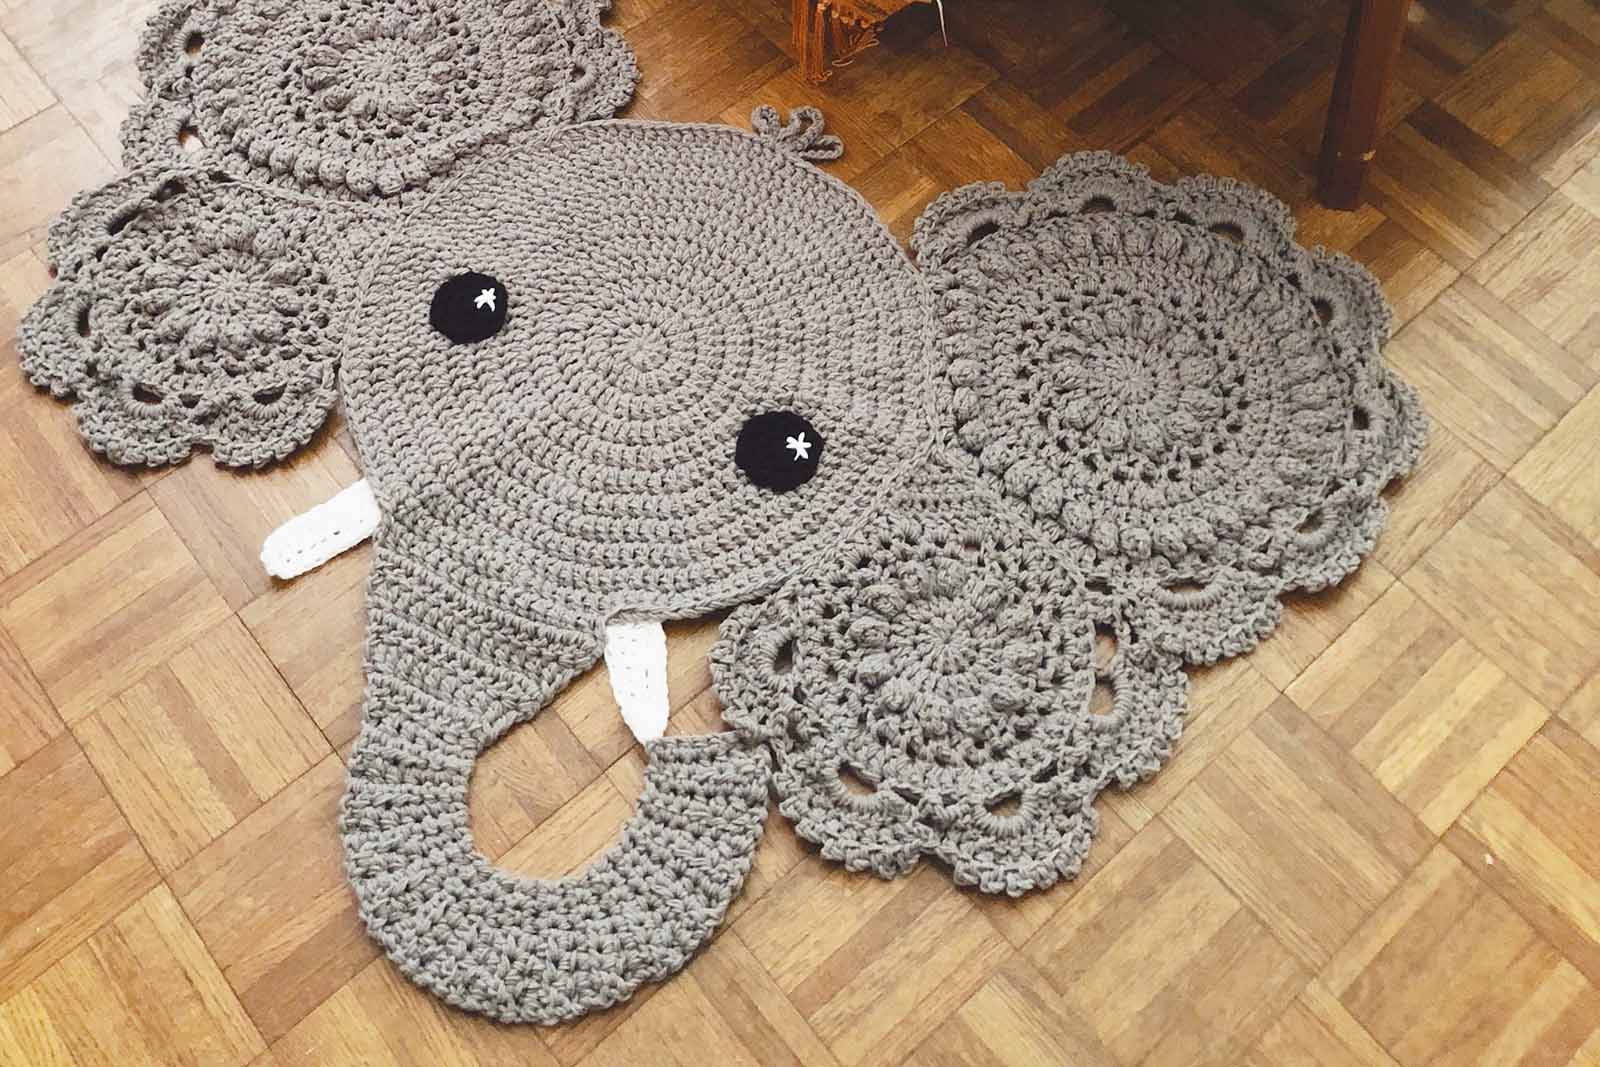 Beautiful handcrafted rug made with crochet techniques in a bedroom.